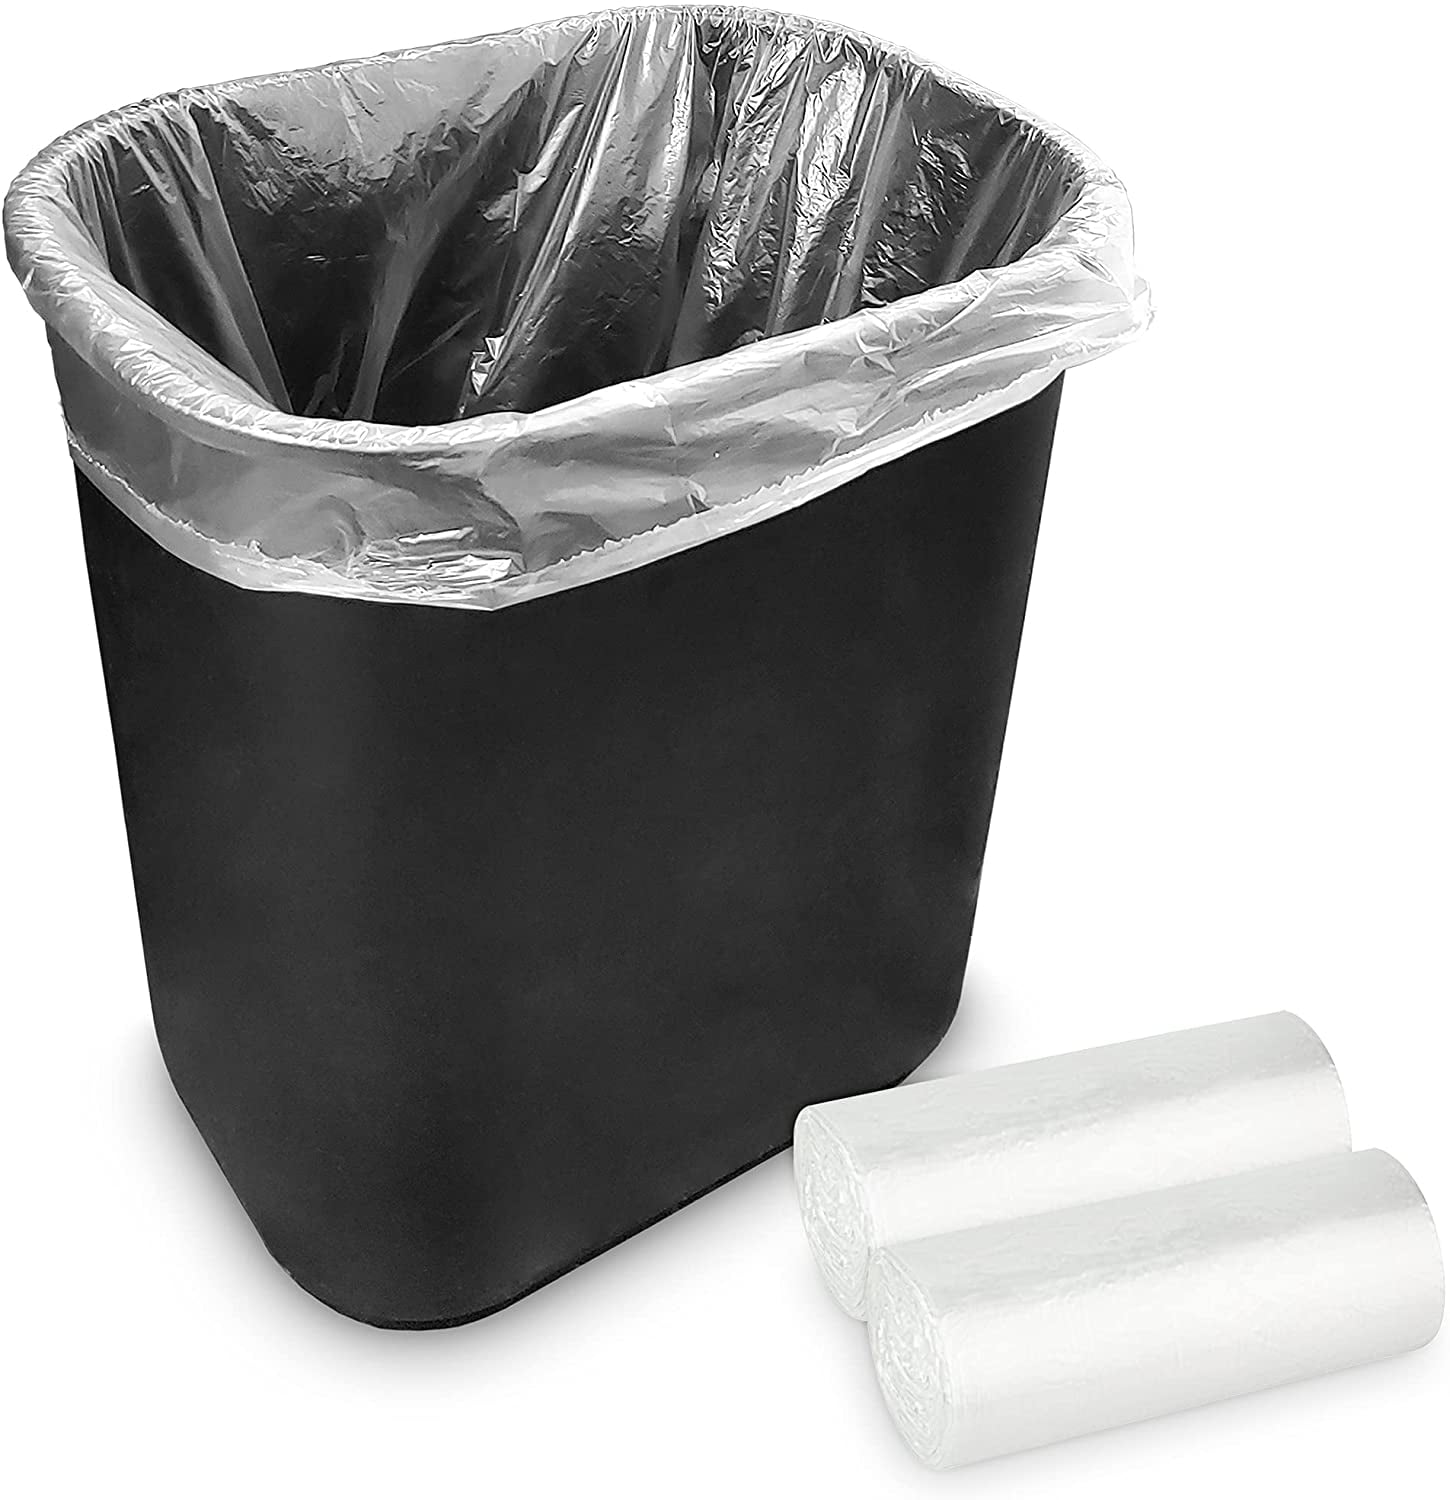 Details about   Compostable Trash Bags 2.6 Gallon Small Disposable Compost Bags 150 Count Bags 